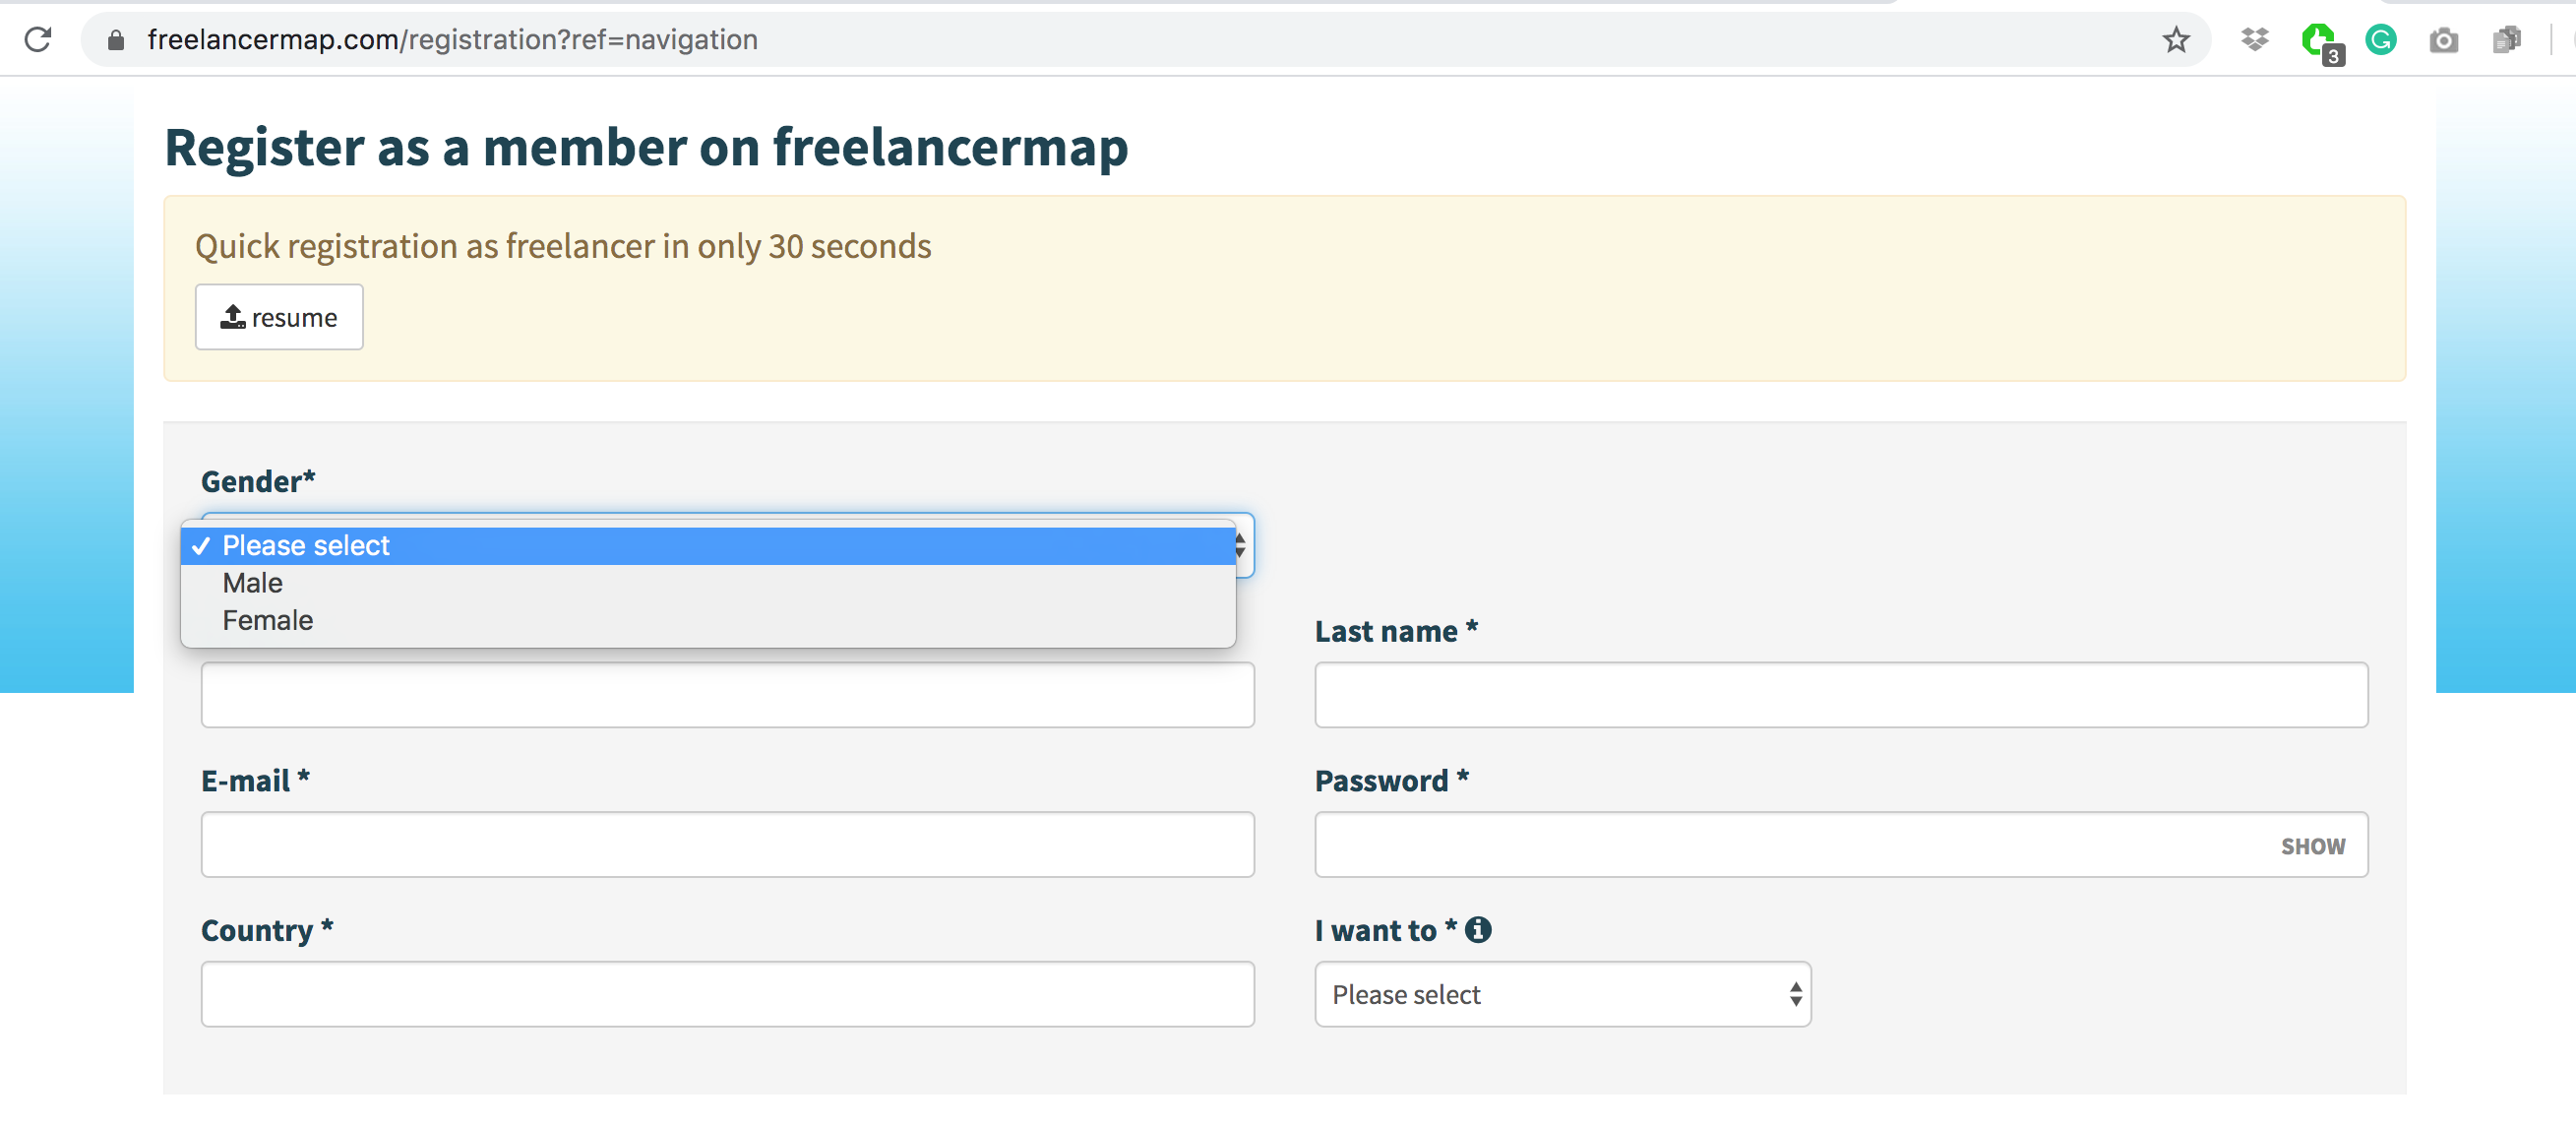 Screenshot from freelancermap. Prompts user for gender and offers options of male and female.